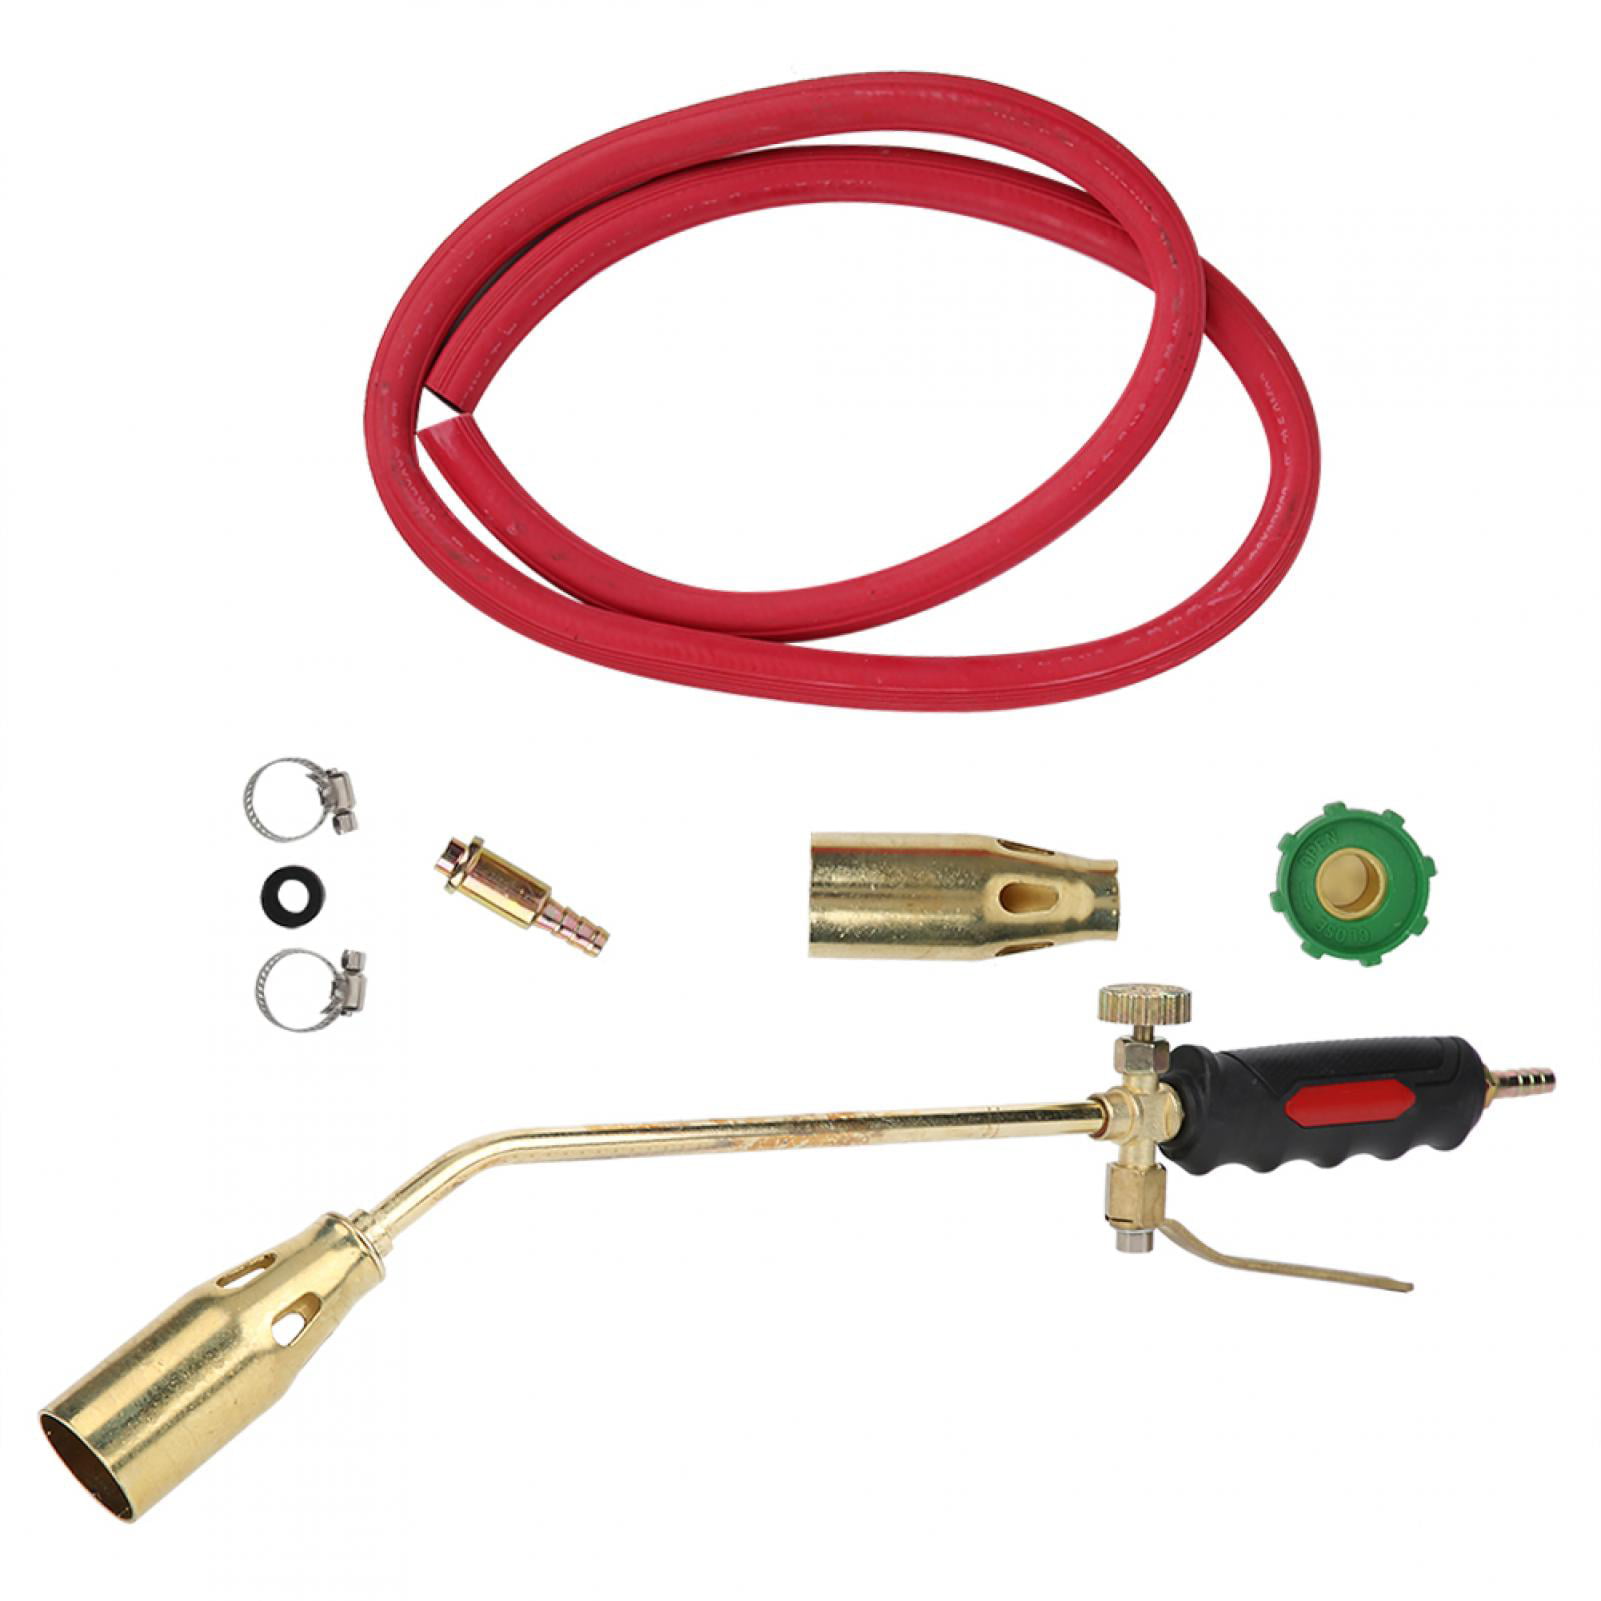 Propane Burner Torch Ignition Tool Iron Brass Plating Ice Melter Natural Gas Liquefied Gas for Methane Butane Good Seal Interface Propane Torch 